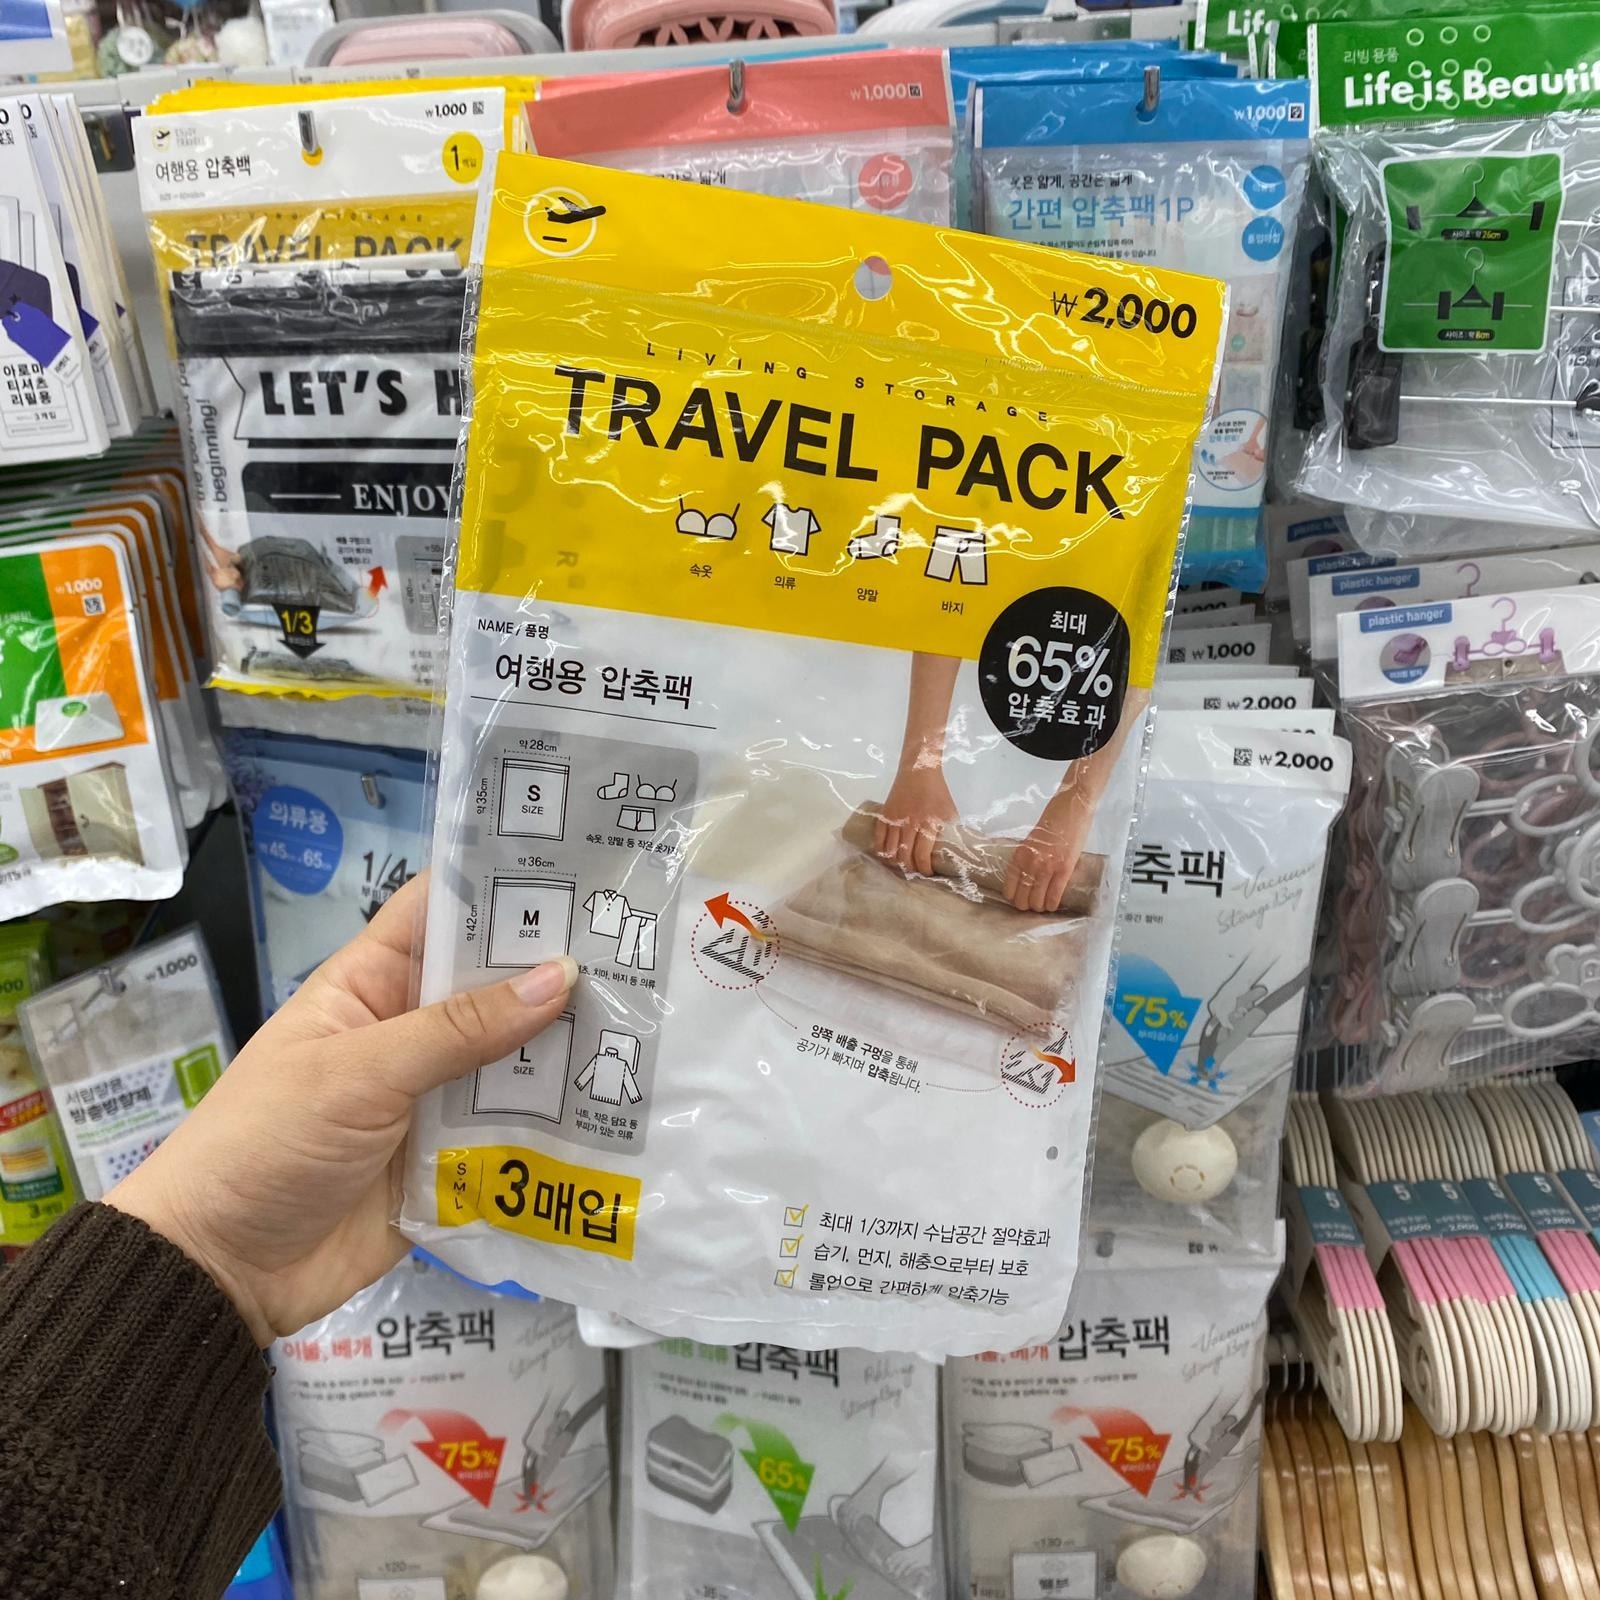 Visit Daiso for items you've forgot to bring. Top 8 useful travel items in Daiso!